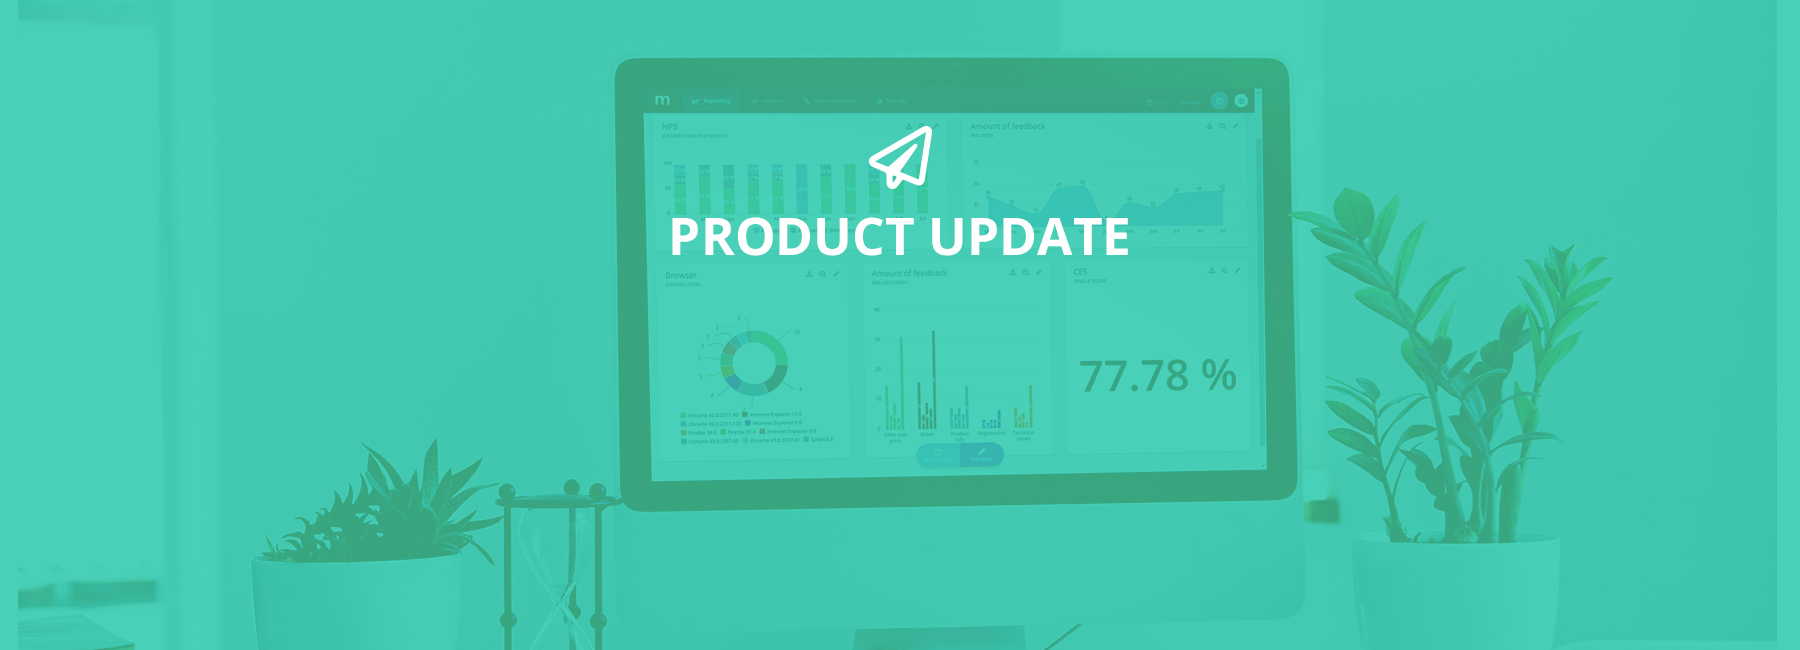 Product Update: new machine learning technology